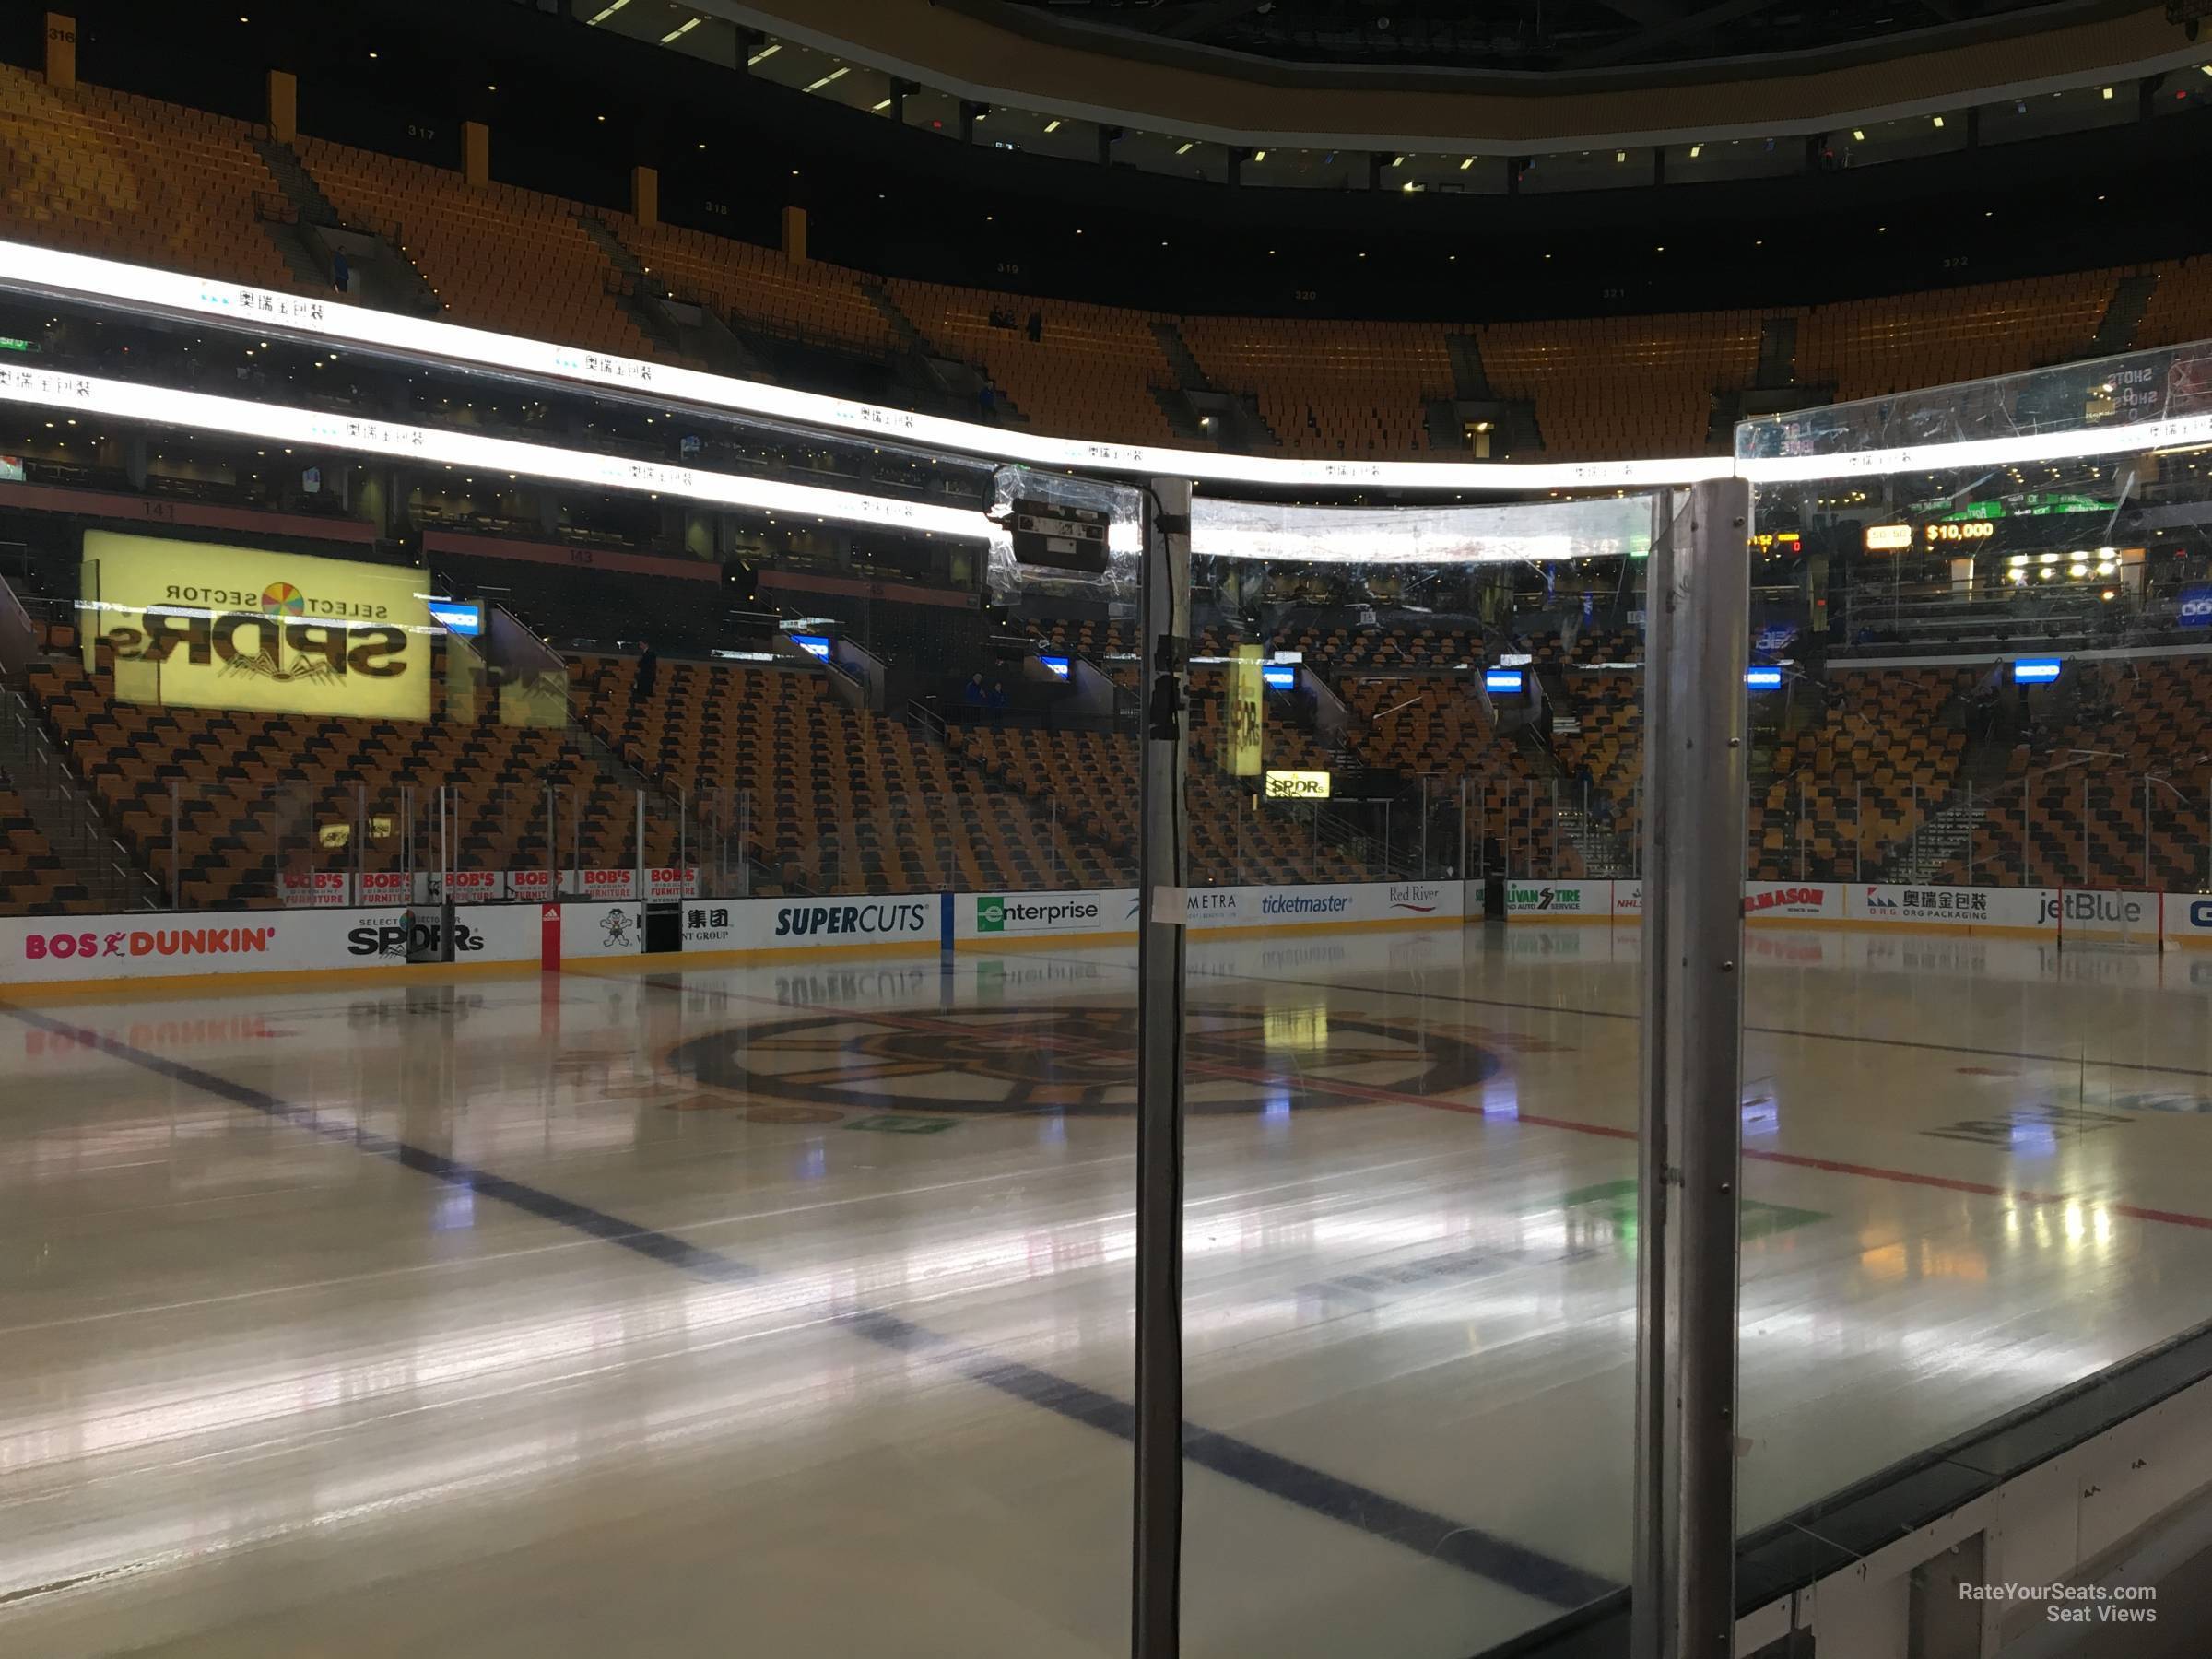 loge 2, row 3 seat view  for hockey - td garden